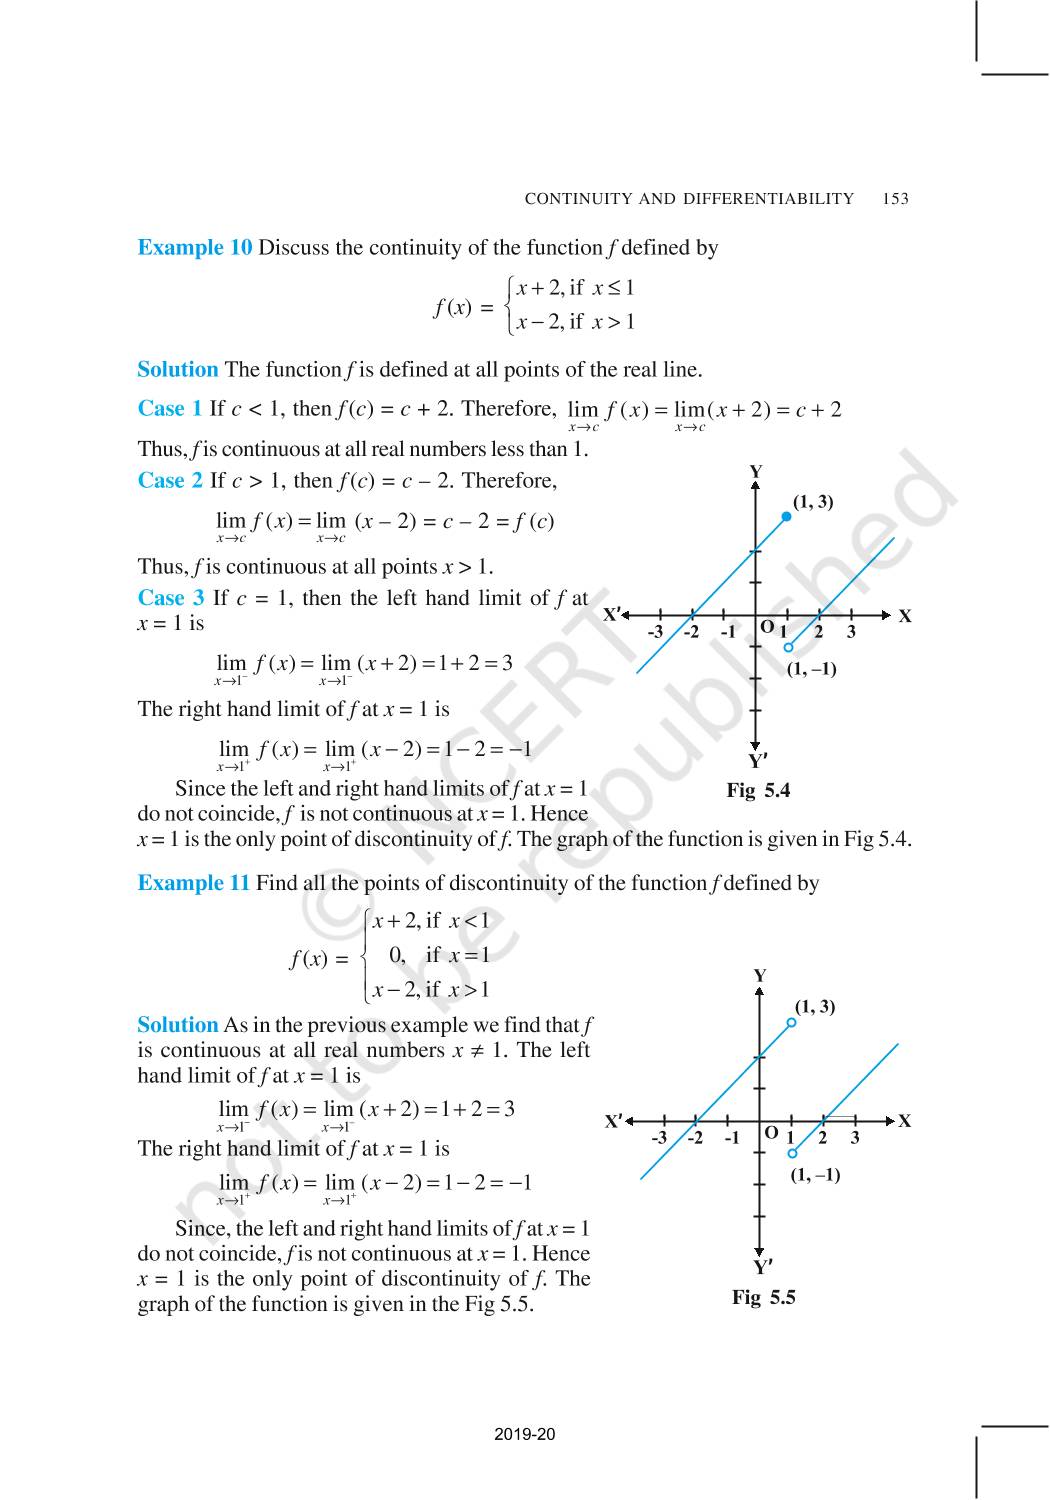 Continuity And Differentiability - NCERT Book of Class 12 Mathematics